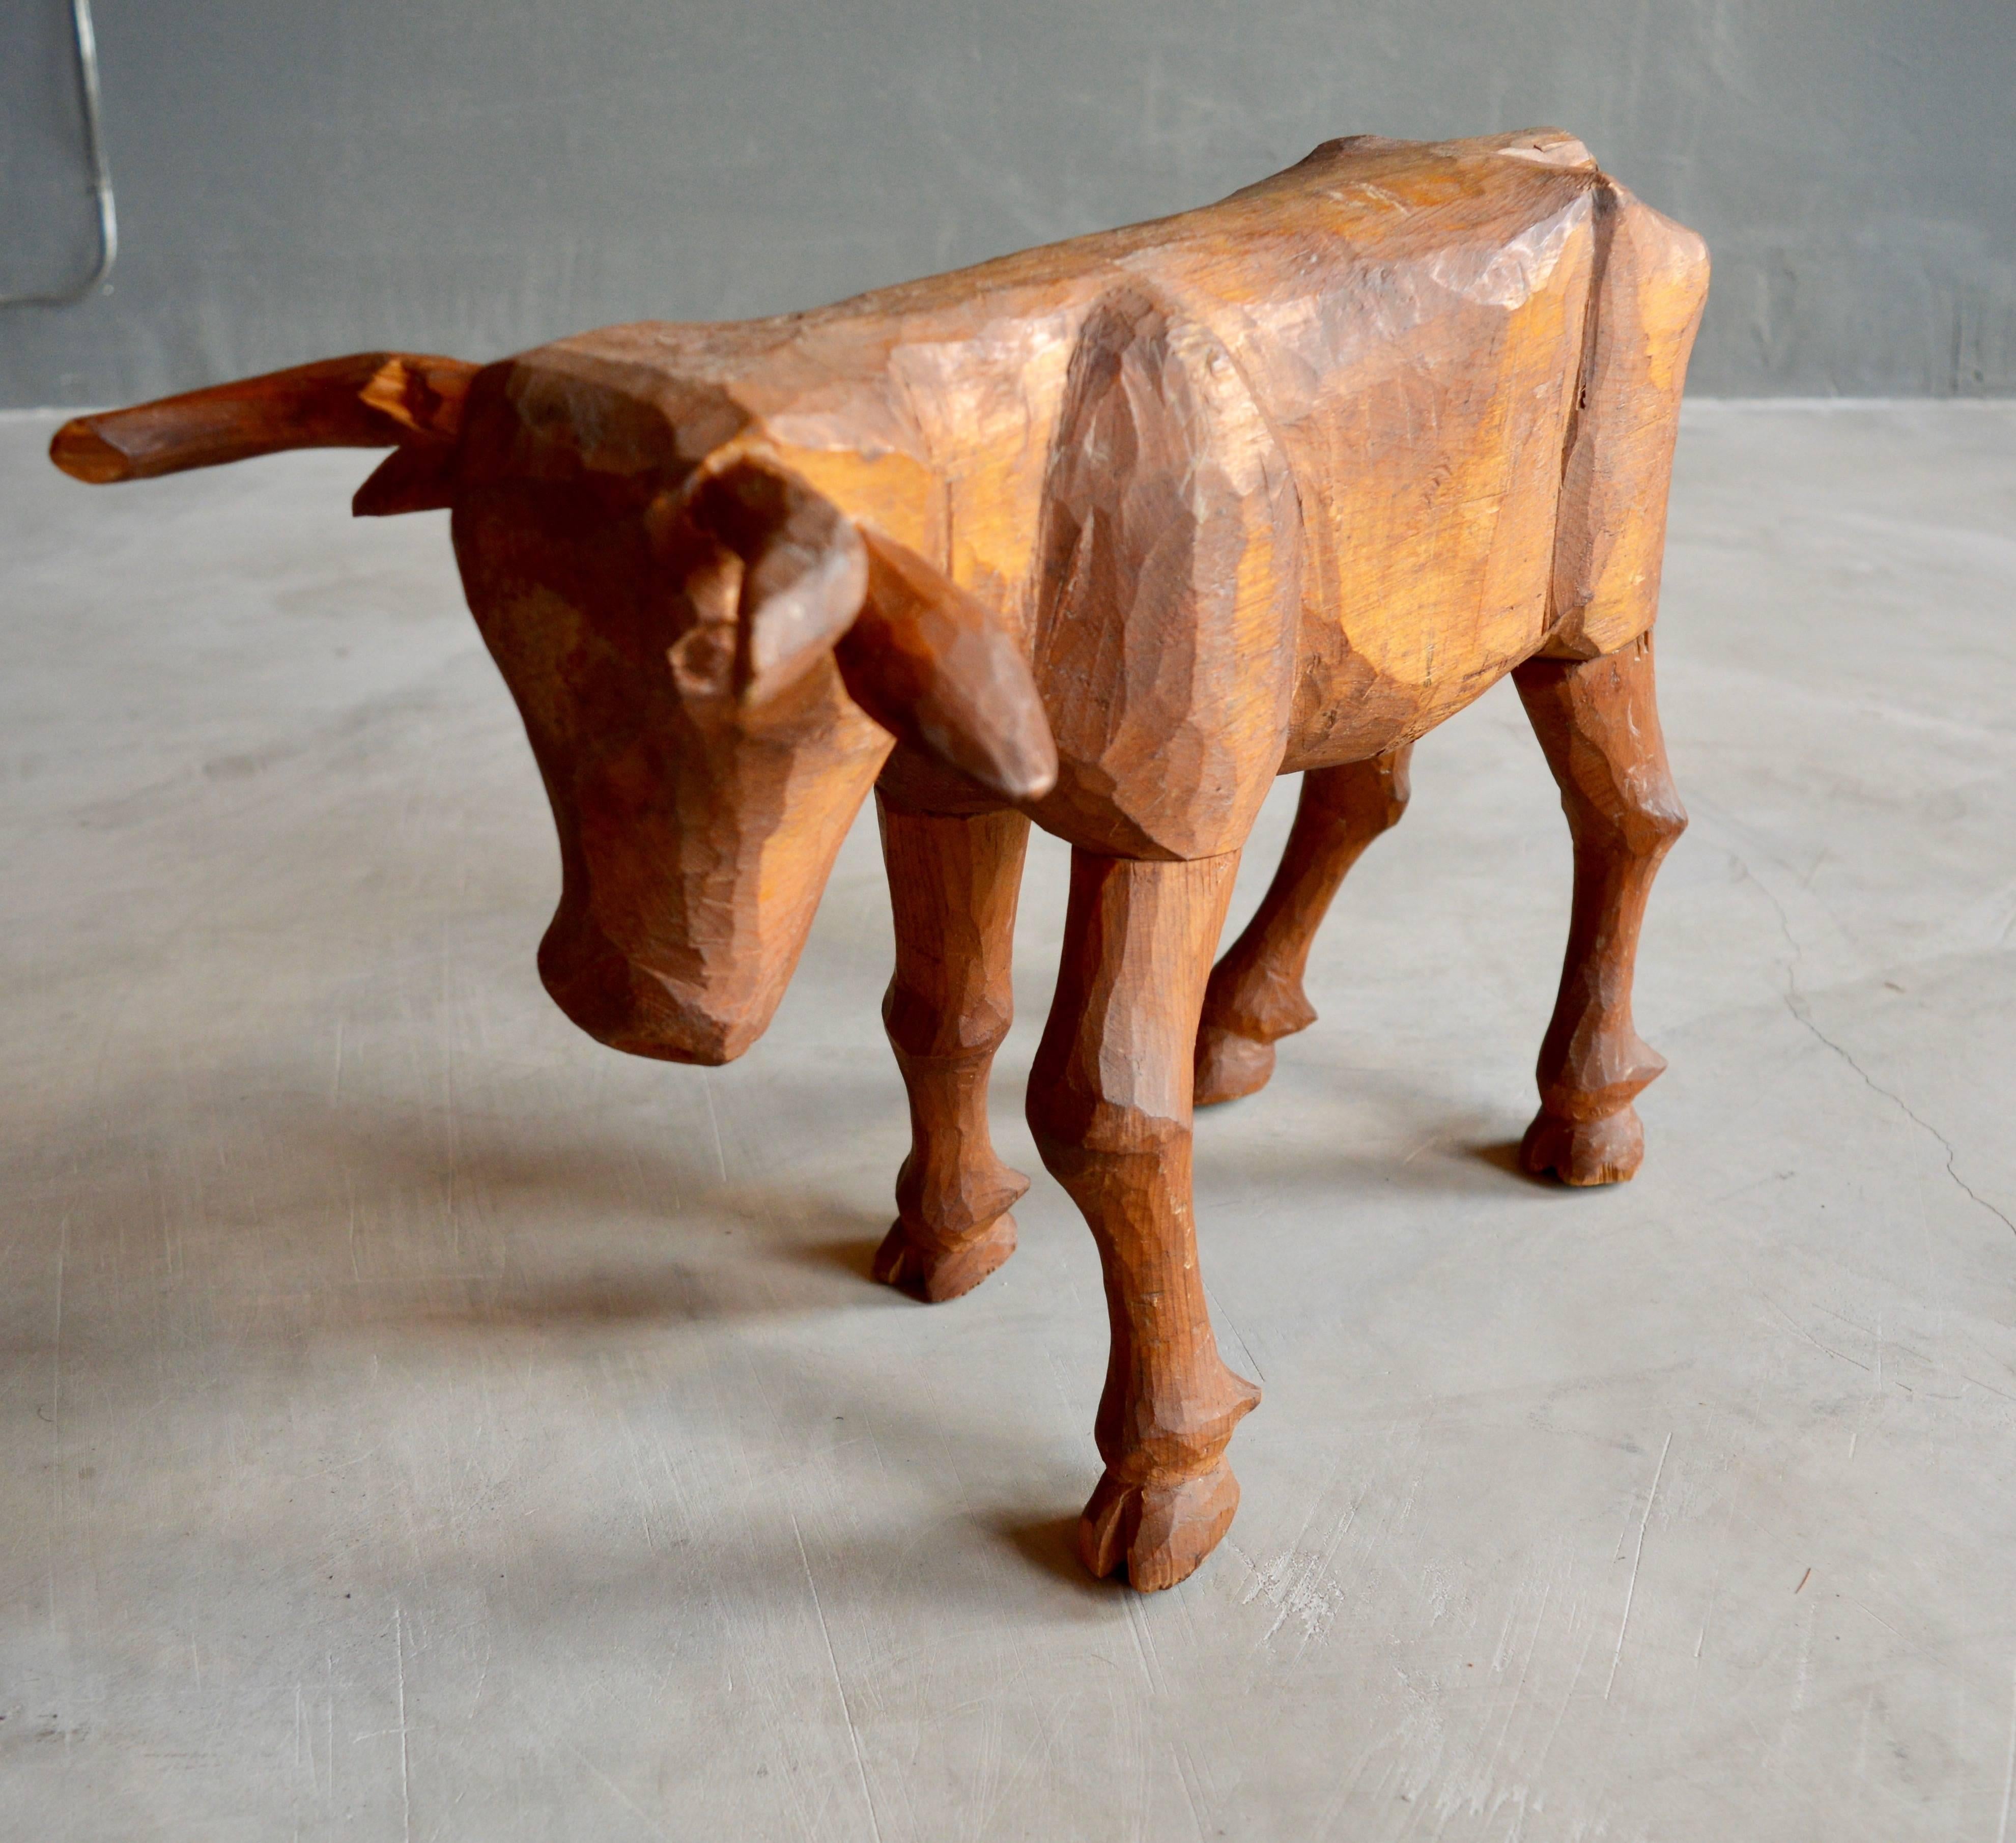 Primitive hand-carved Folk Art bull made of wood. Great hand work and scale. One Horn has a chip. Great sculptural piece.